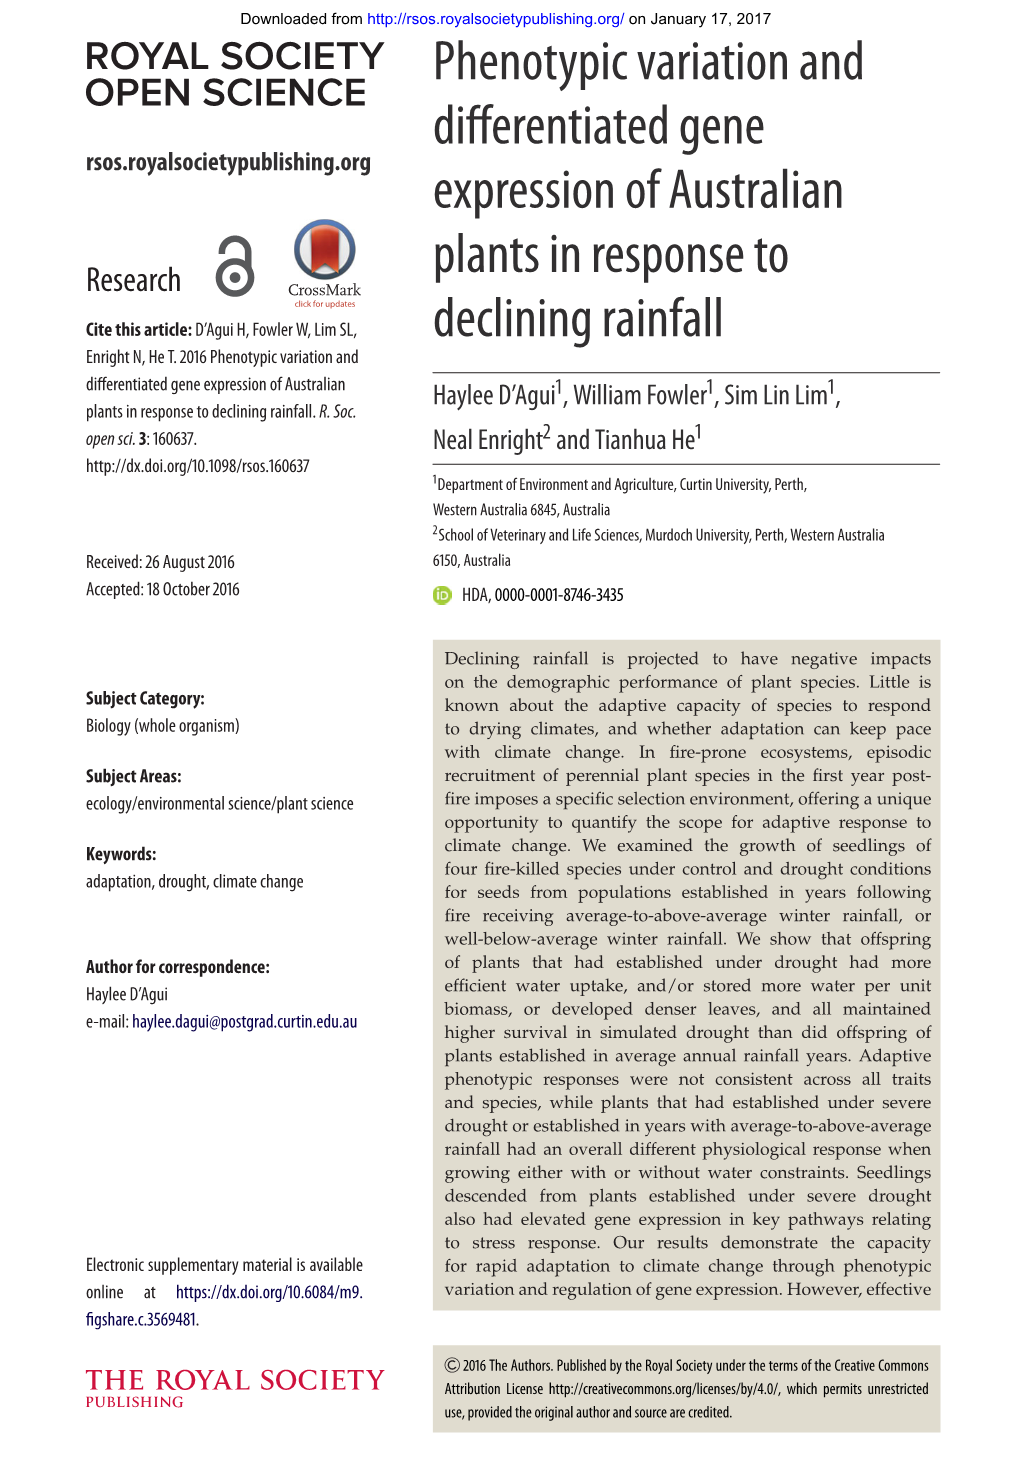 Phenotypic Variation and Differentiated Gene Expression of Australian Haylee D’Agui1, William Fowler1, Sim Lin Lim1, Plants in Response to Declining Rainfall